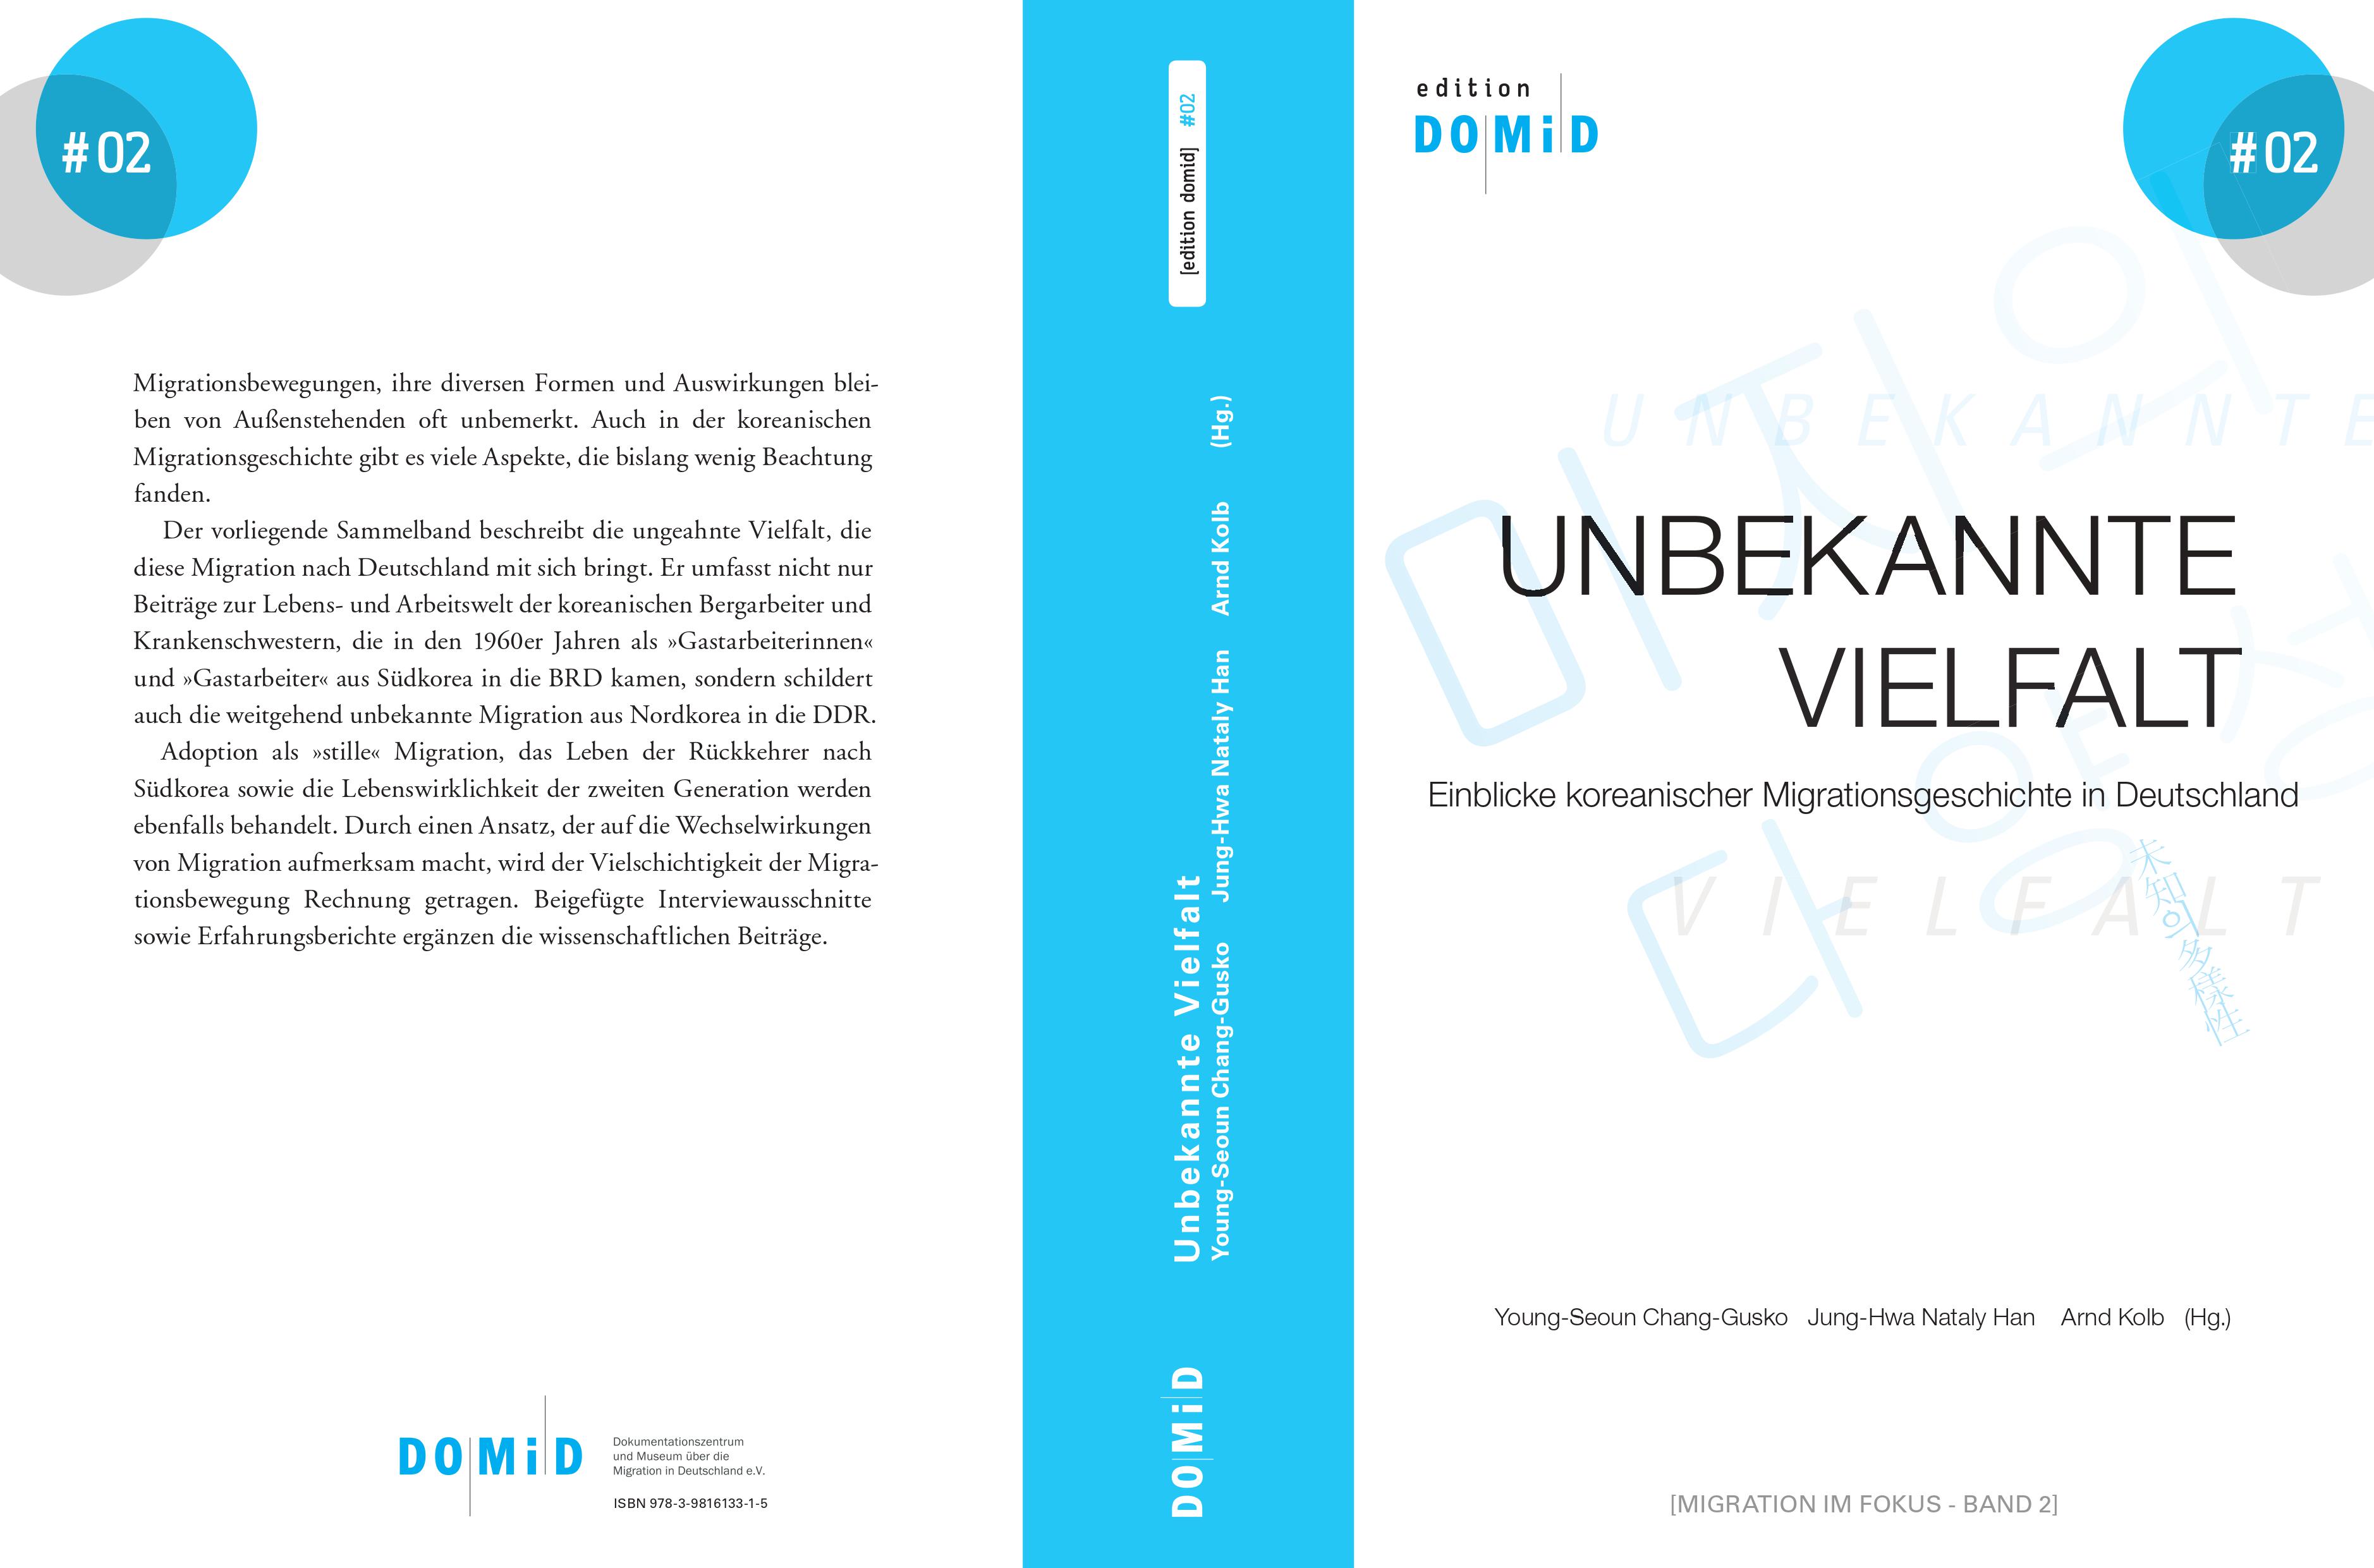 2014: "Unknown Diversity", an anthology on Korean immigration On the occasion of the 50th anniversary of the signing of the "Recruitment Agreement" between the Federal Republic of Germany and the Republic of Korea, DOMiD published an anthology on Korean migration to Germany together with the Korea Foundation and the Korea Association. Photo: DOMiD Archive, Cologne